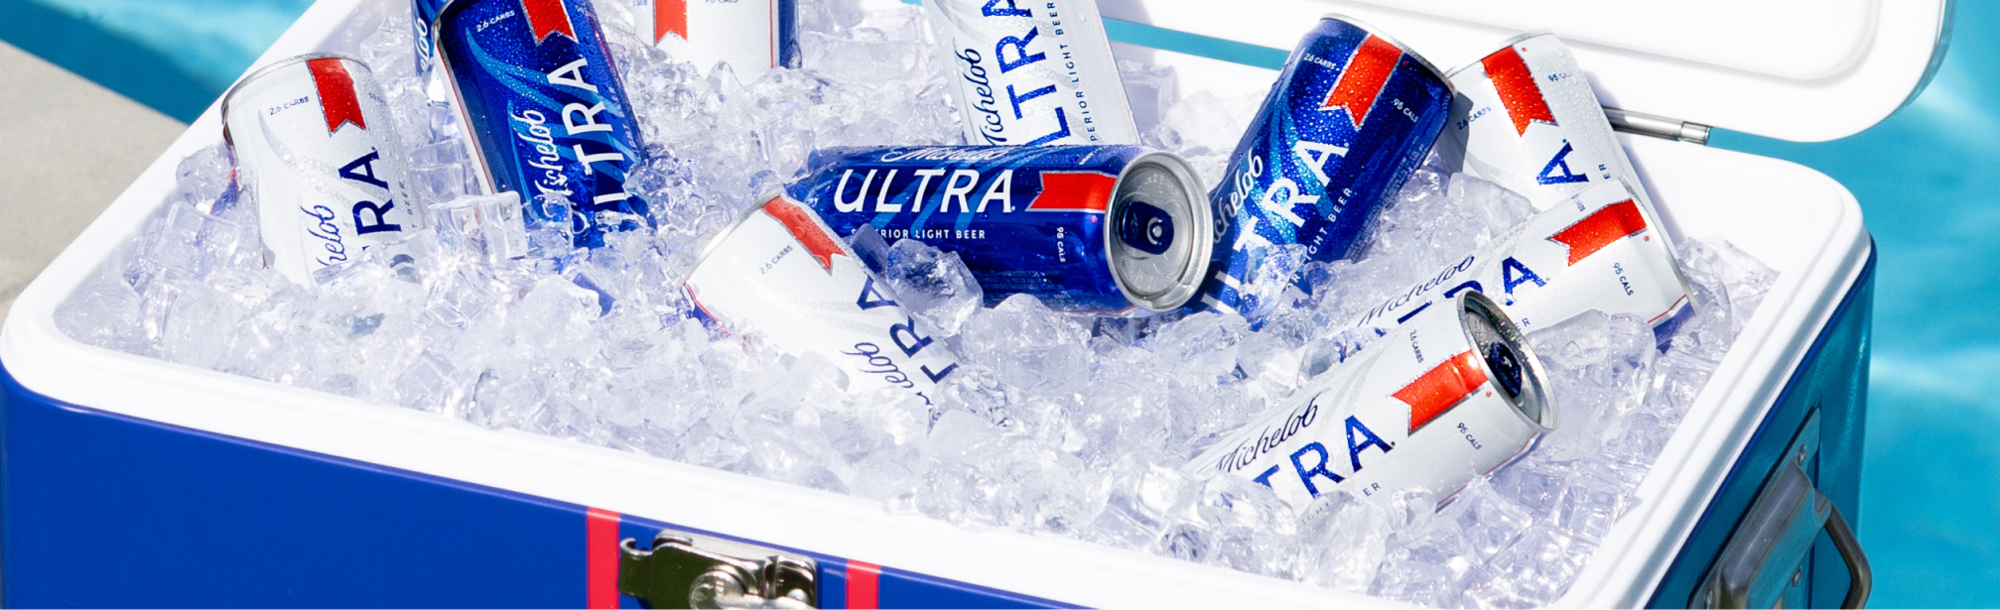 This is the main background of a product backdrop of Michelob ULTRA